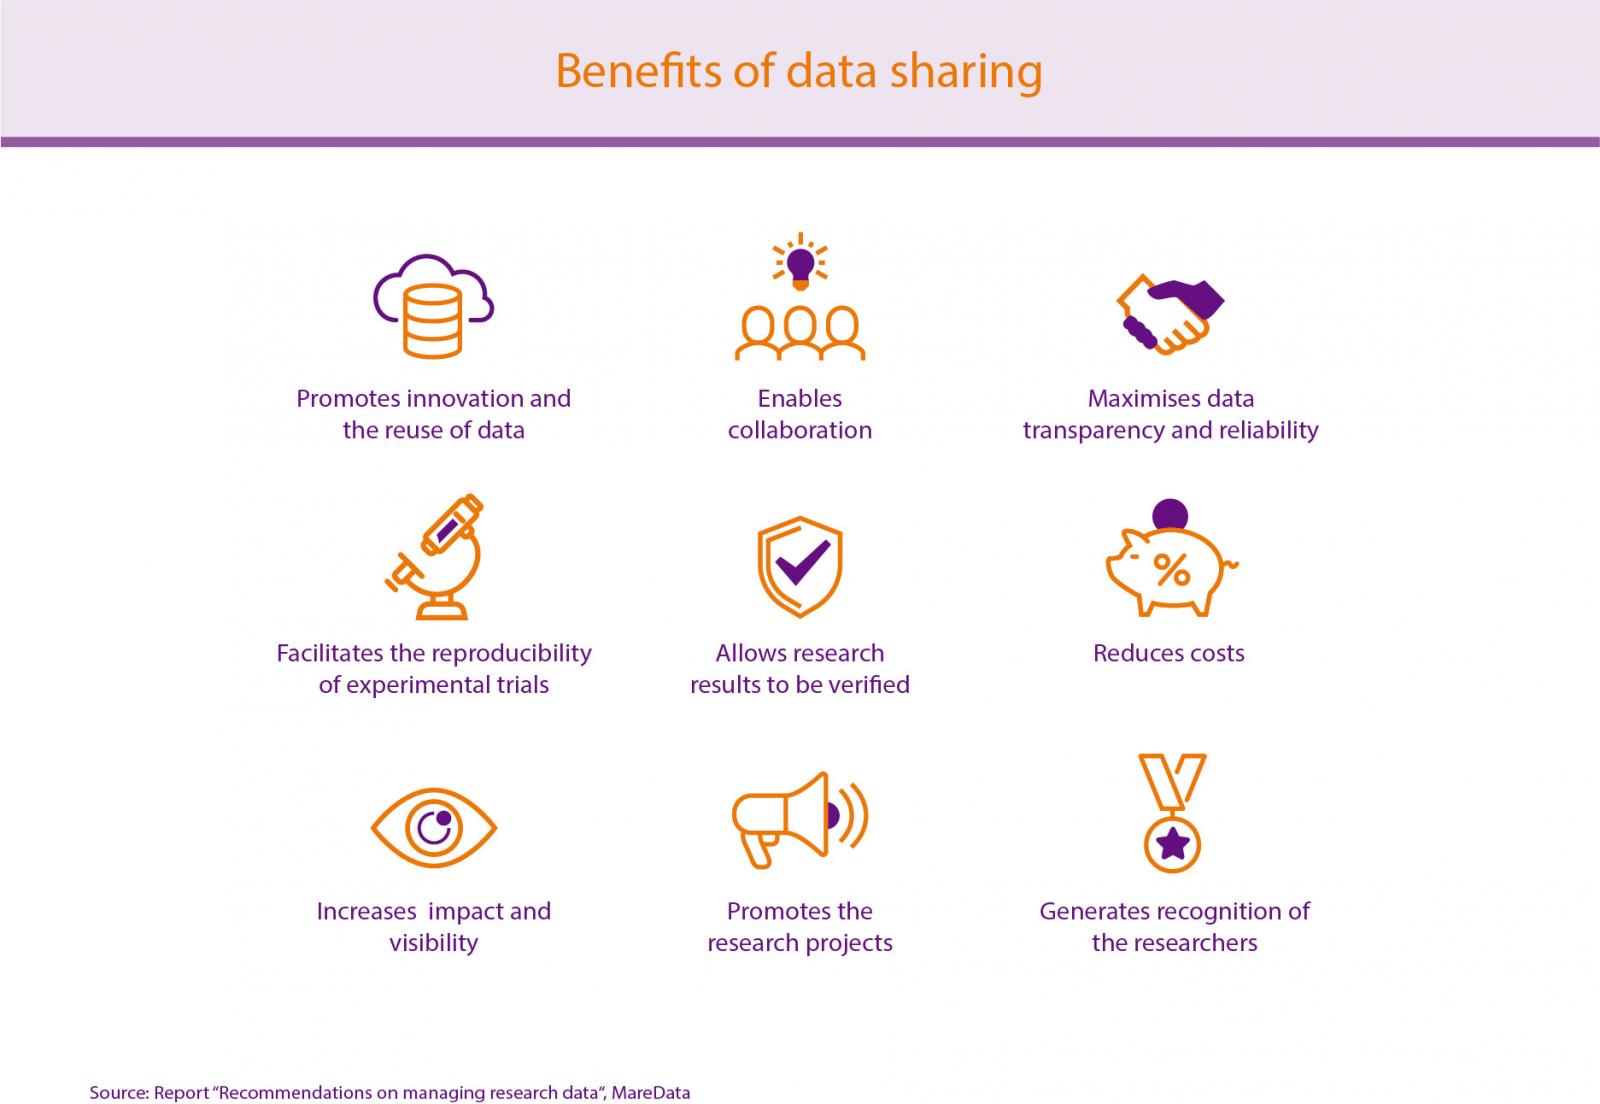 Benefits of sharing research data